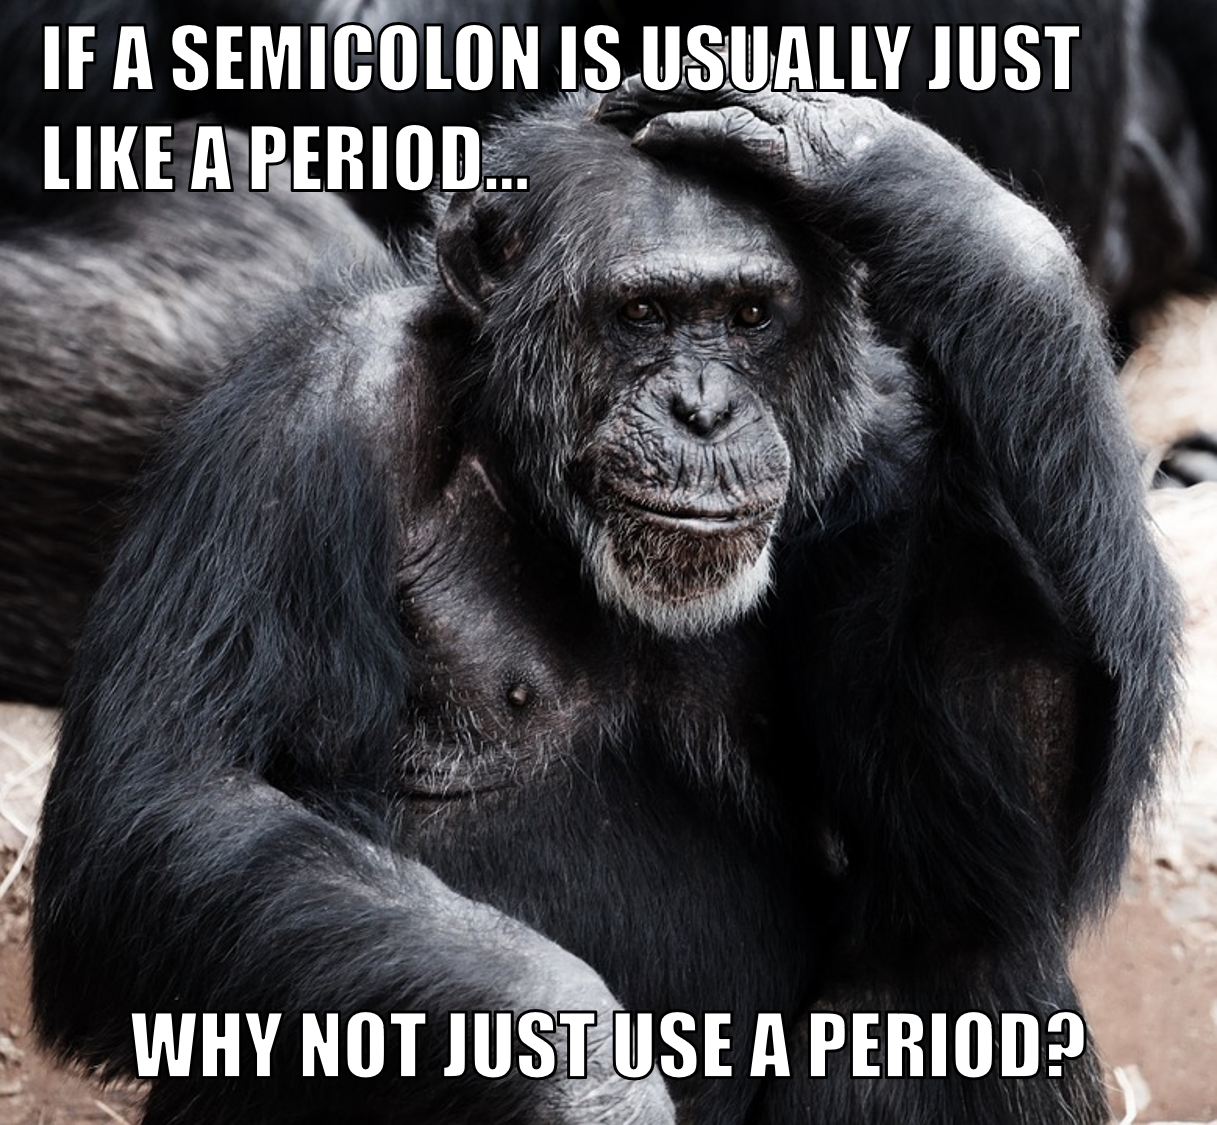 Meme - If a semicolon is usually just like a period, why not just use a period? Learn more about grammar essentials.